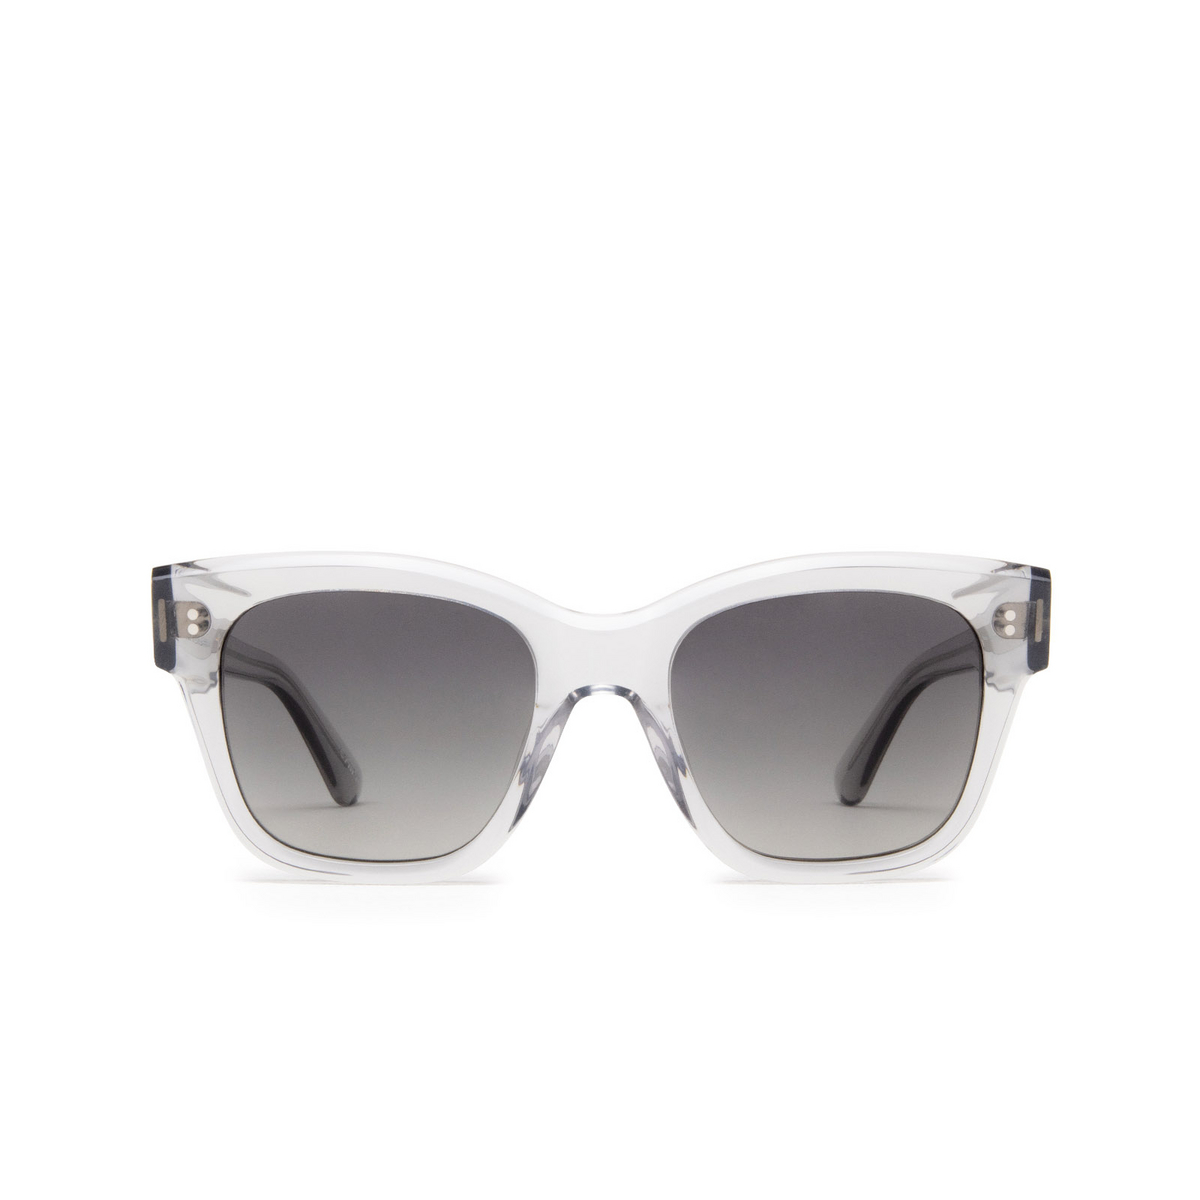 Chimi® Butterfly Sunglasses: 07 color Grey - front view